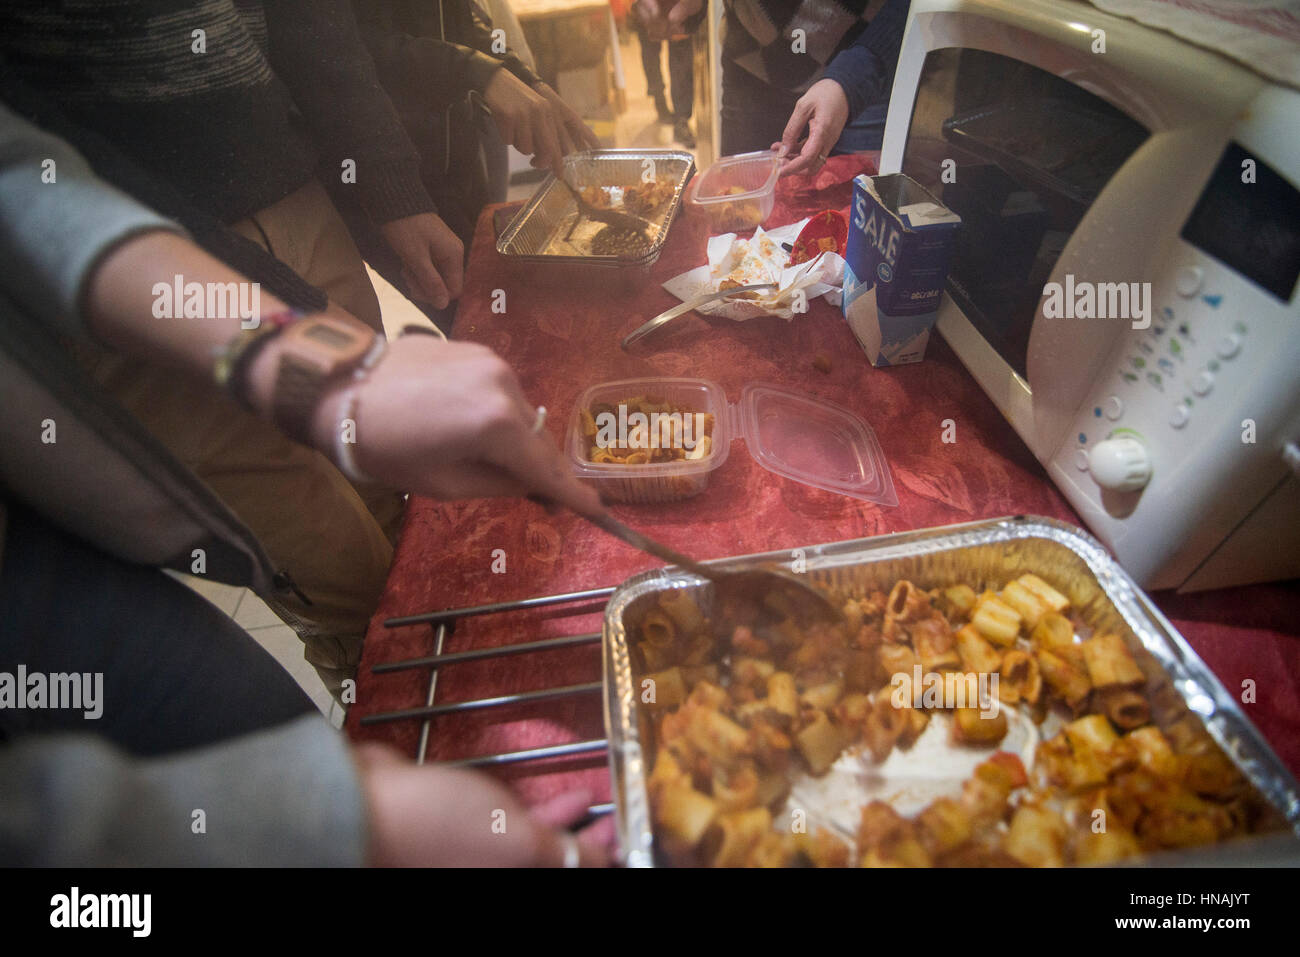 Turin, Italy-29 January 2017: The Community of Sant'Egidio of Turin, which operates around the world, every week for three years distributes and services homeless people in Turin bringing them in person prepared hot meals and blankets to help them how to best face the street life. Stock Photo